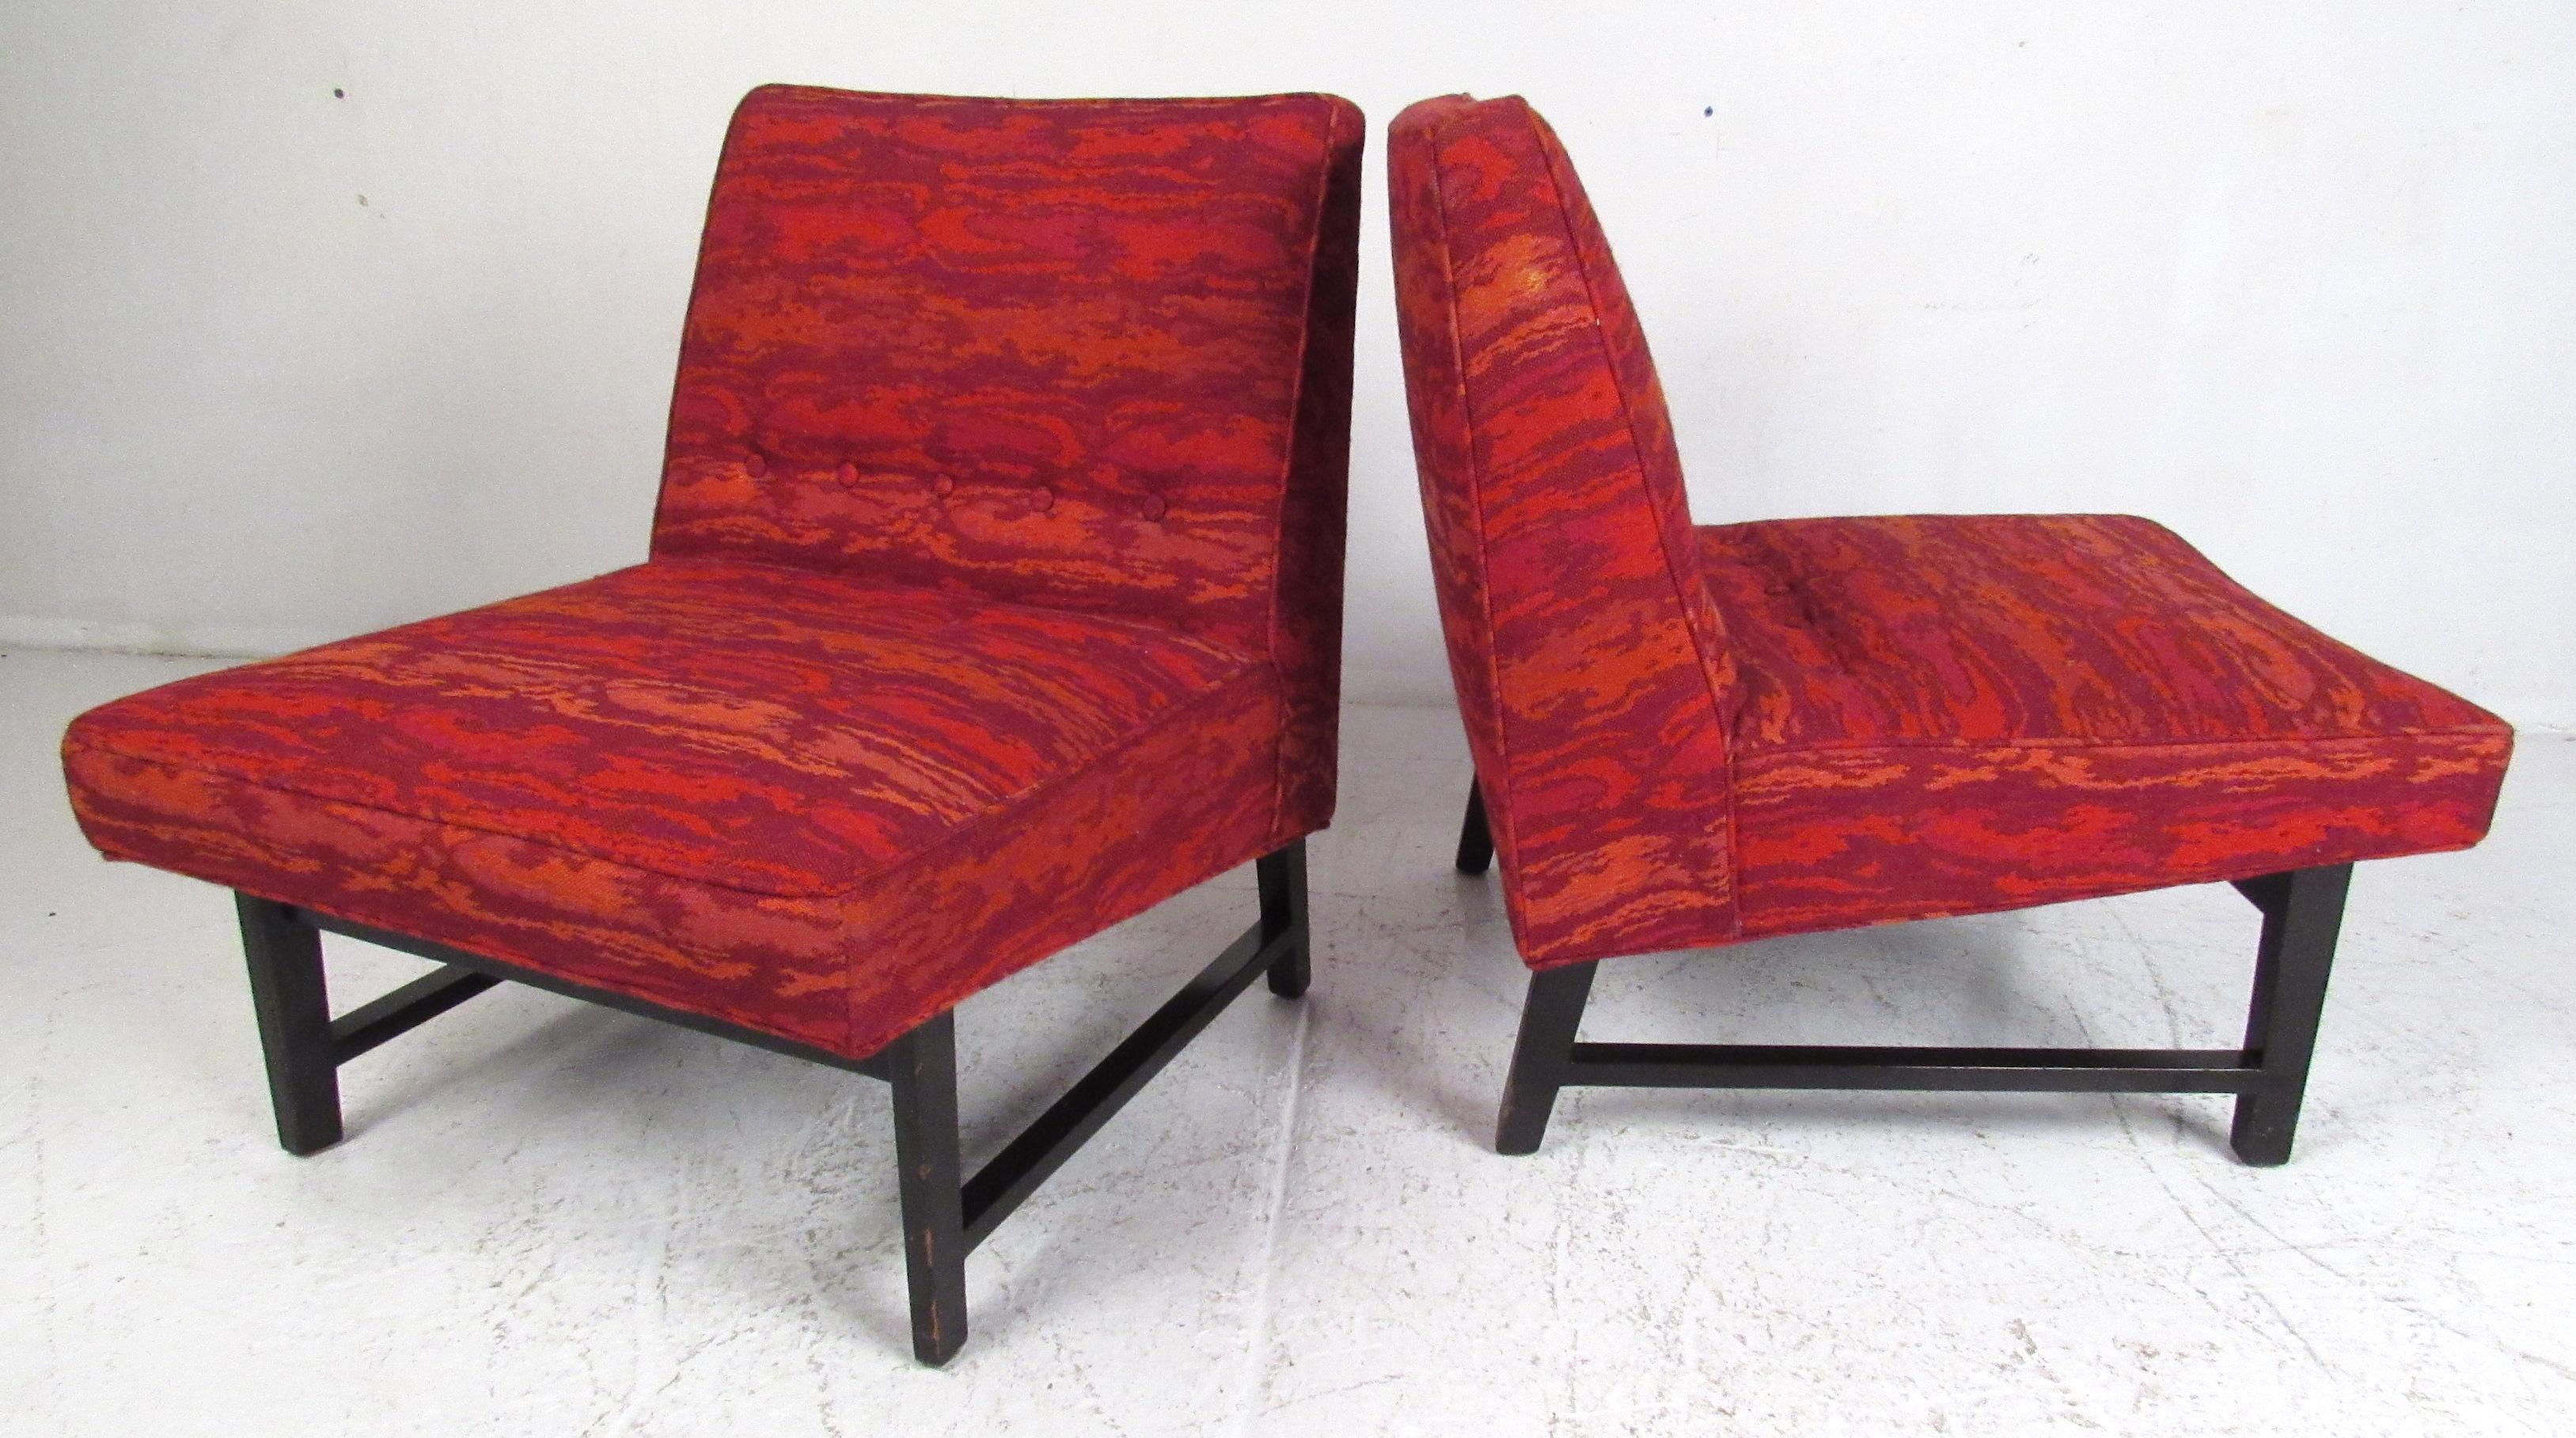 Pair of button-tufted slipper chairs on espresso colored frames with loose lumbar pillows designed by Edward Wormley for Dunbar Furniture Company. Please confirm item location (NY or NJ) with dealer.